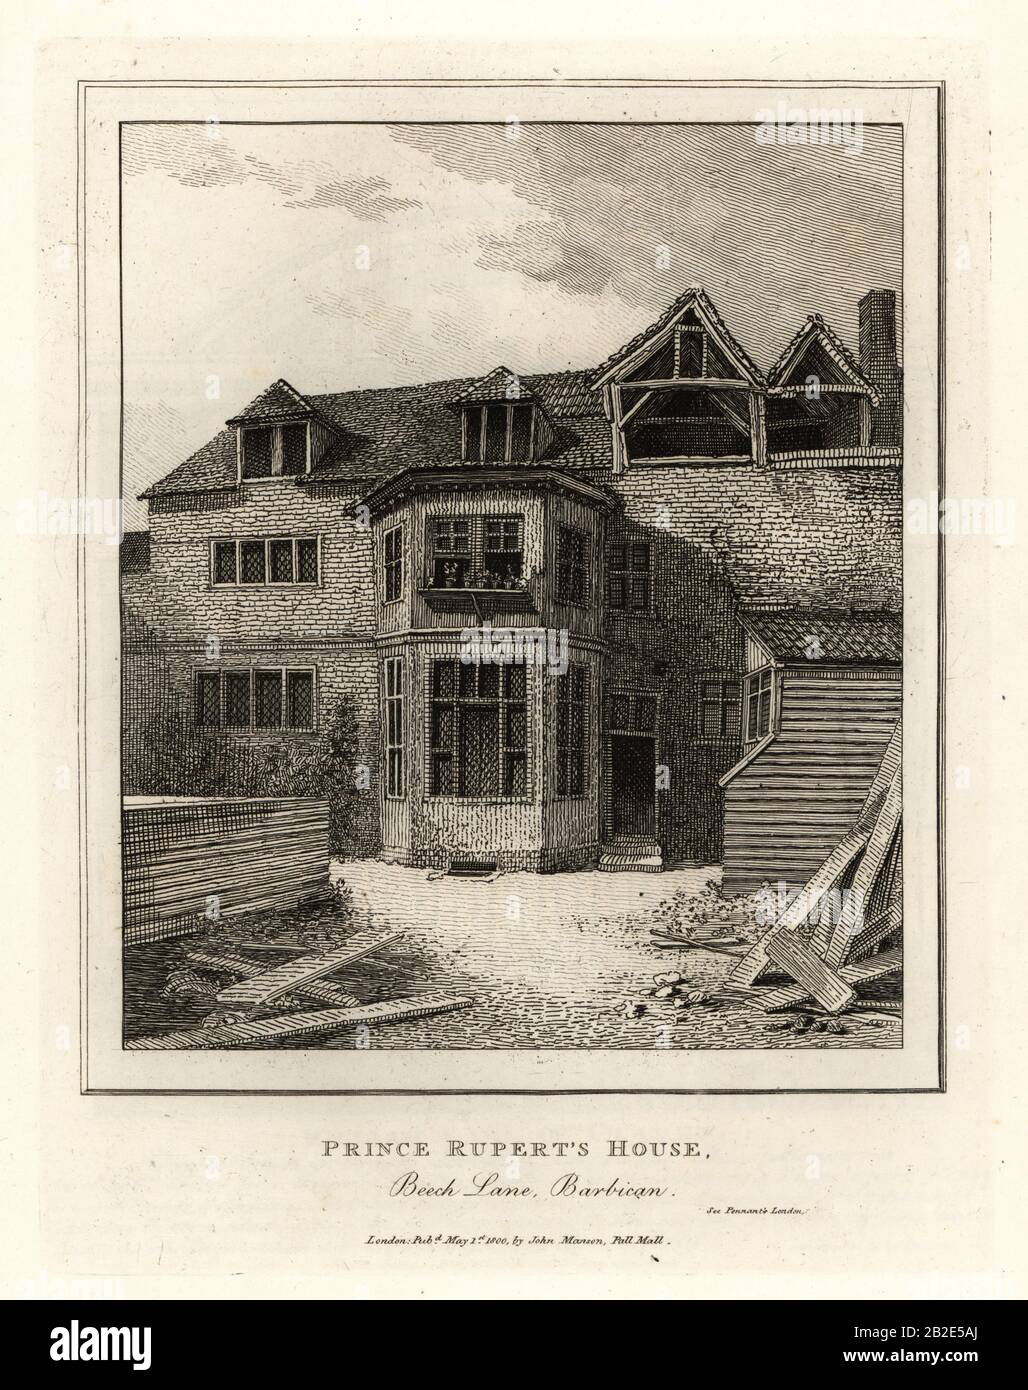 Prince Rupert’s House, Beech Lane, Barbican. 17th century house built for Prince Rupert of the Rhine, Duke of Cumberland 1619-1682. Copperplate engraving by John Thomas Smith after original drawings by members of the Society of Antiquaries from his J.T. Smith’s Antiquities of London and its Environs, J. Sewell, R. Folder, J. Simco, London, 1800. Stock Photo